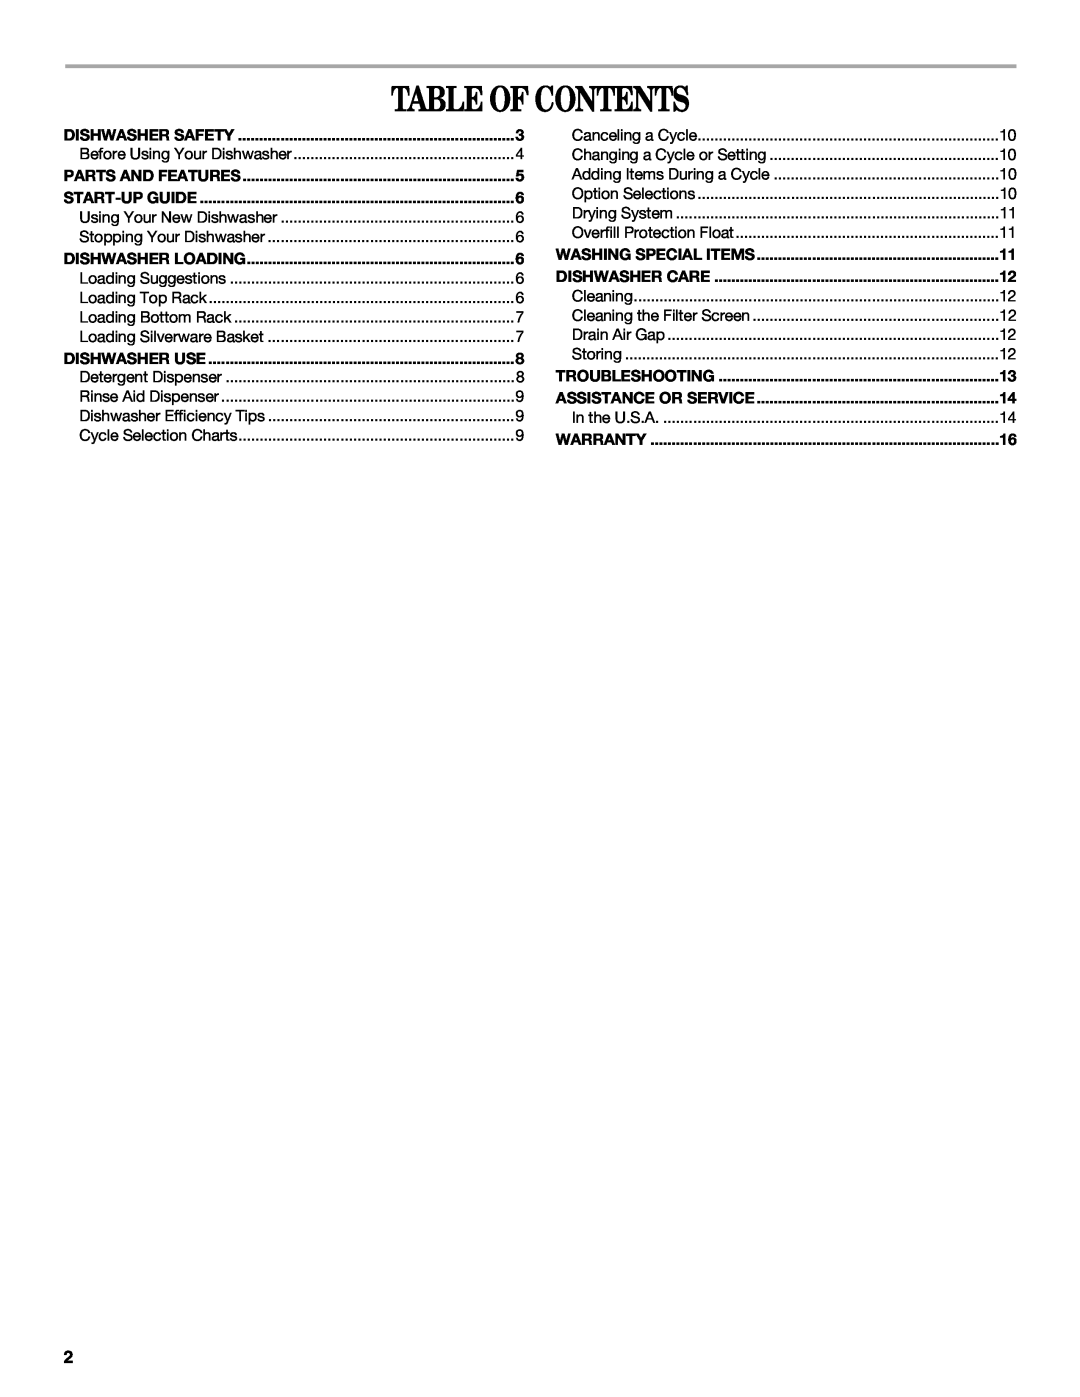 Whirlpool ISD4700 manual Table Of Contents 